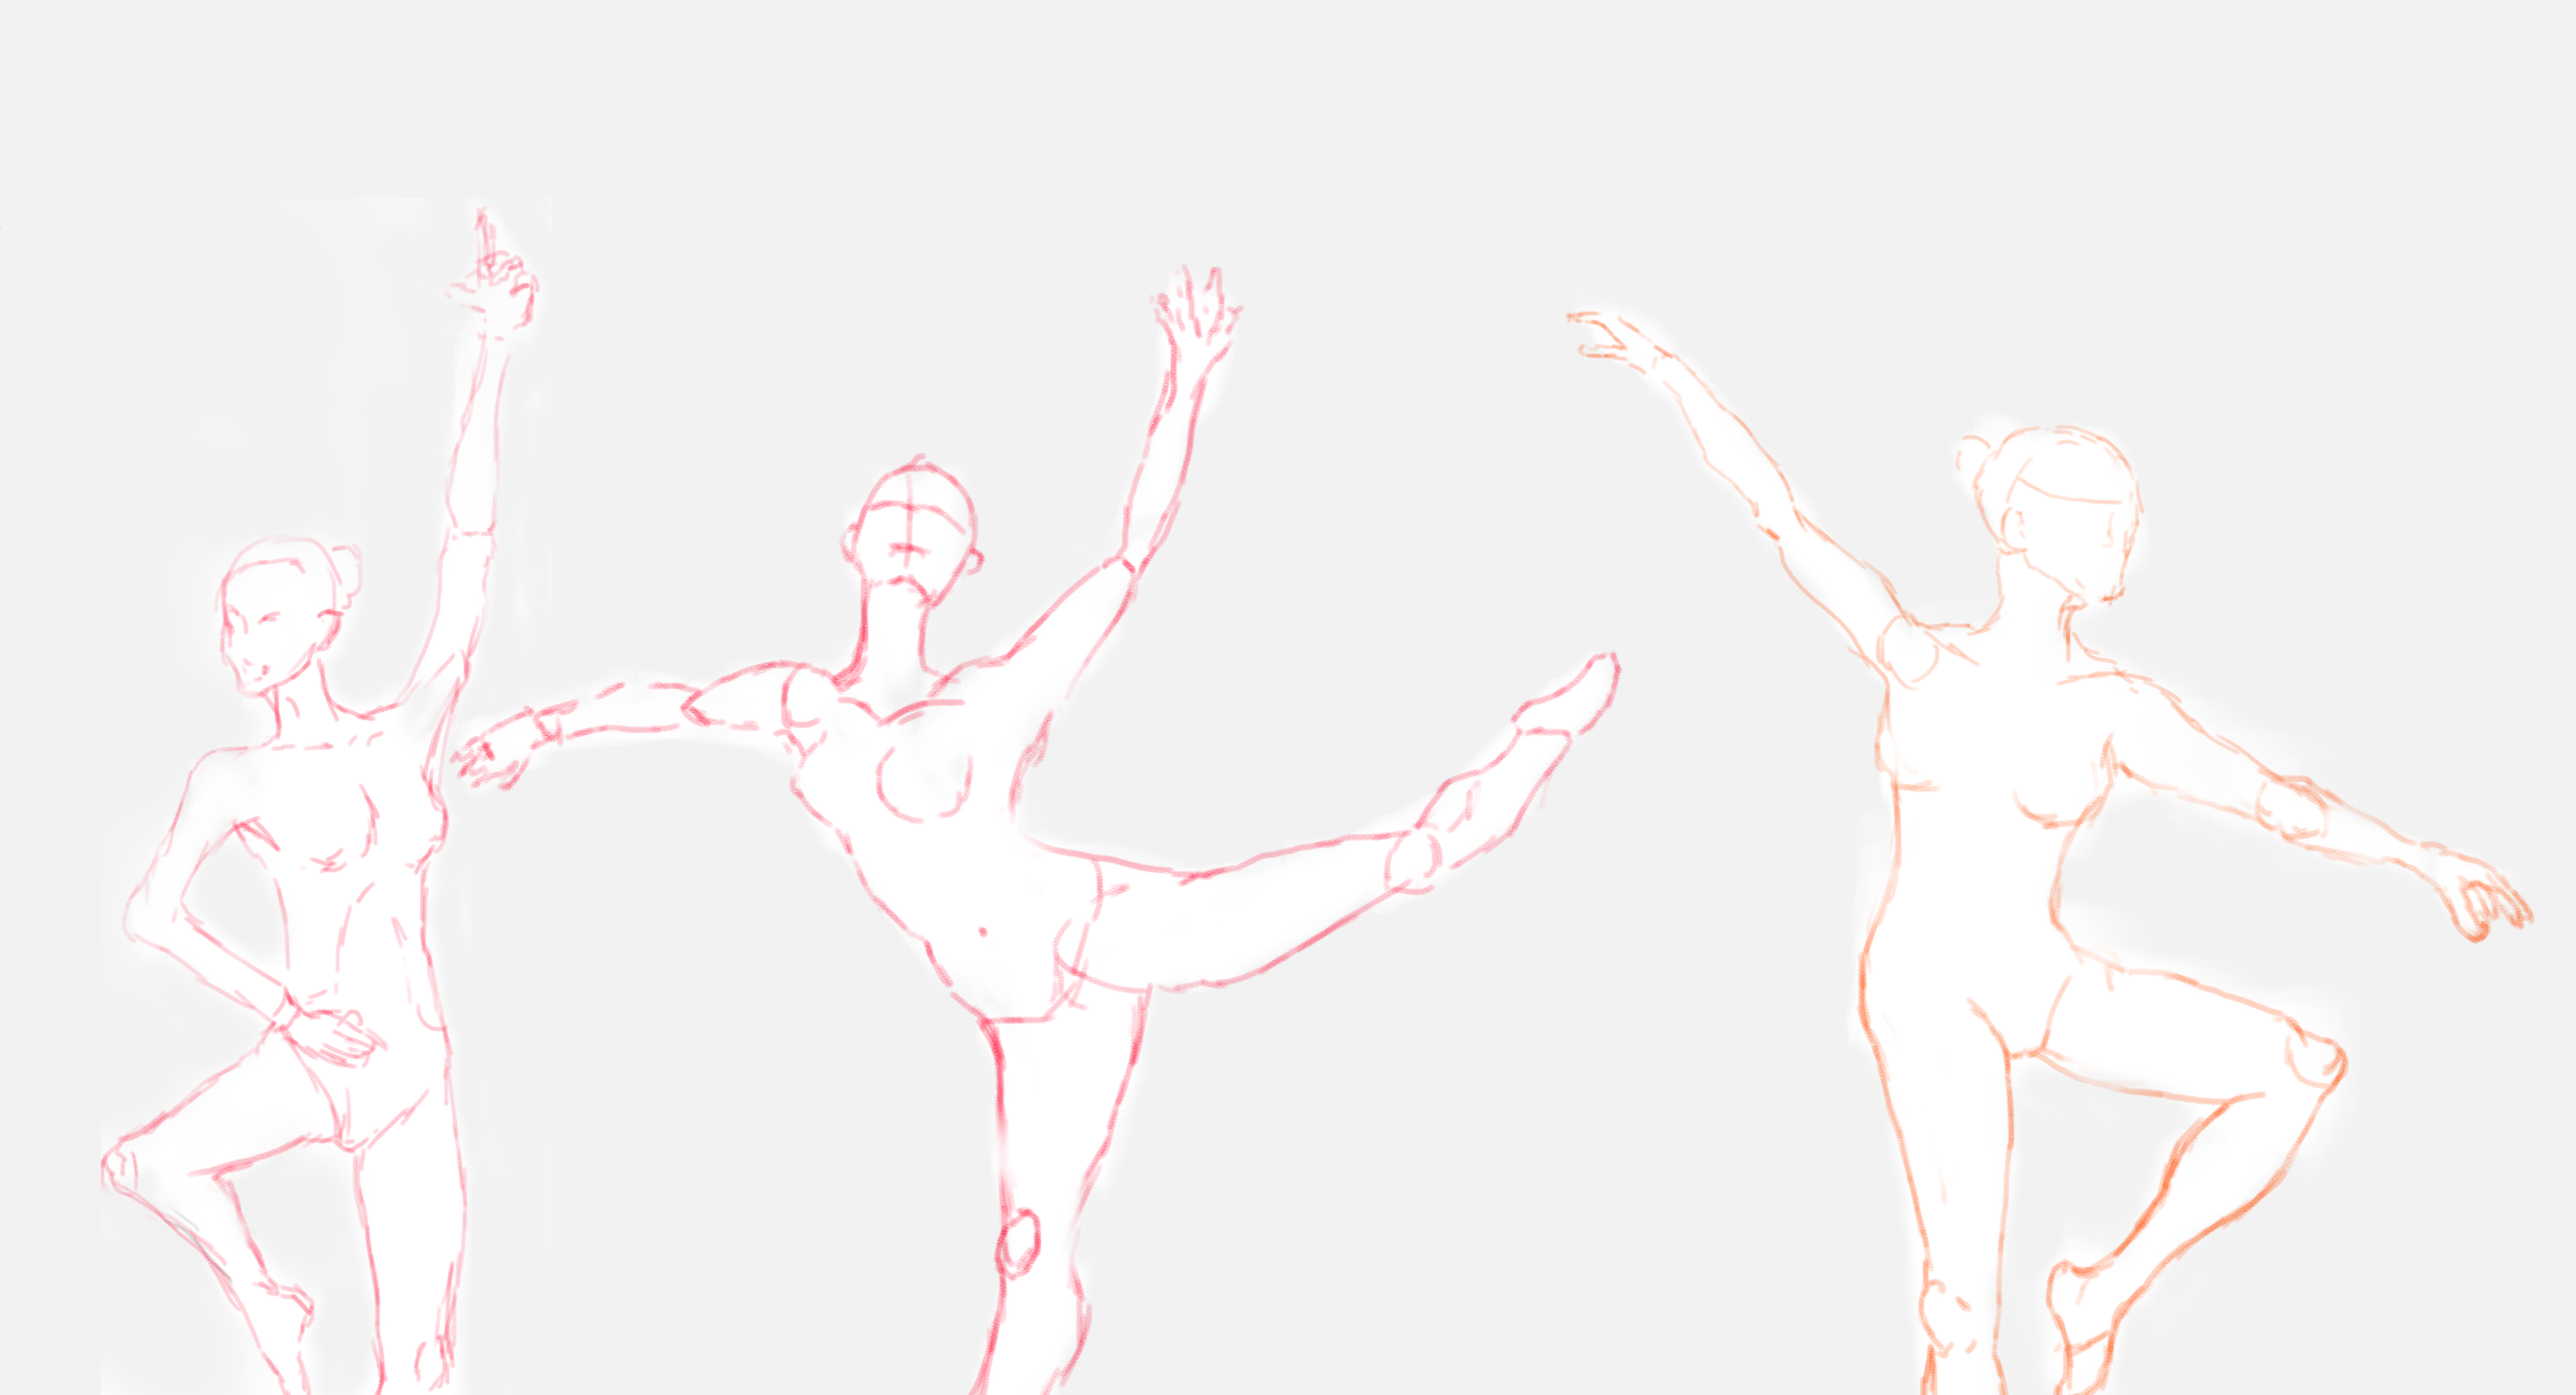 Premium Vector | Women girls jumping sketch set on white background  isolated vector